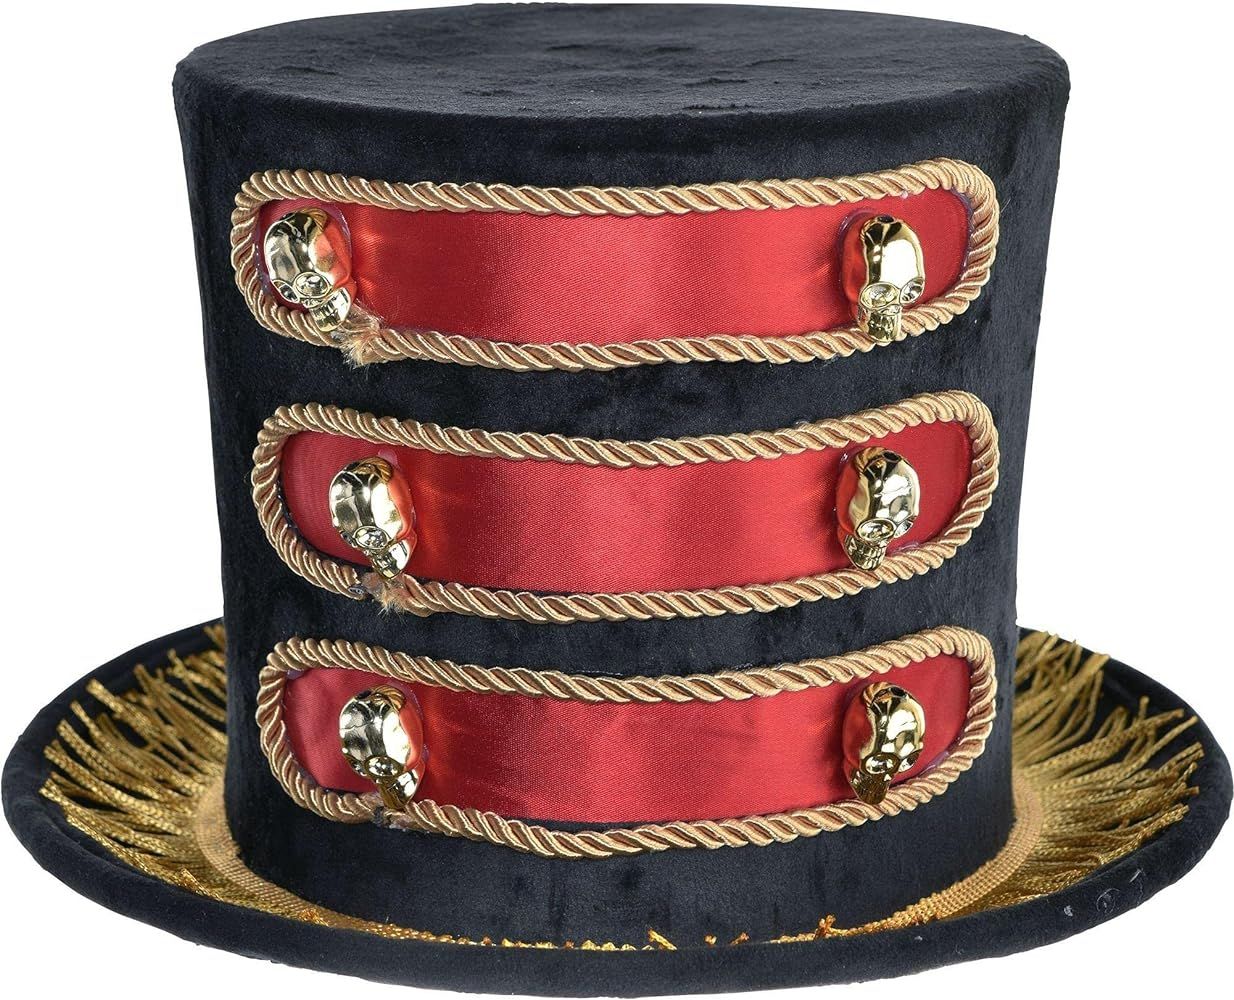 Amscan Ringmaster Top Hat Costume Accessory - One Size (Pack of 1) - Black & Red Design, Perfect ... | Amazon (US)